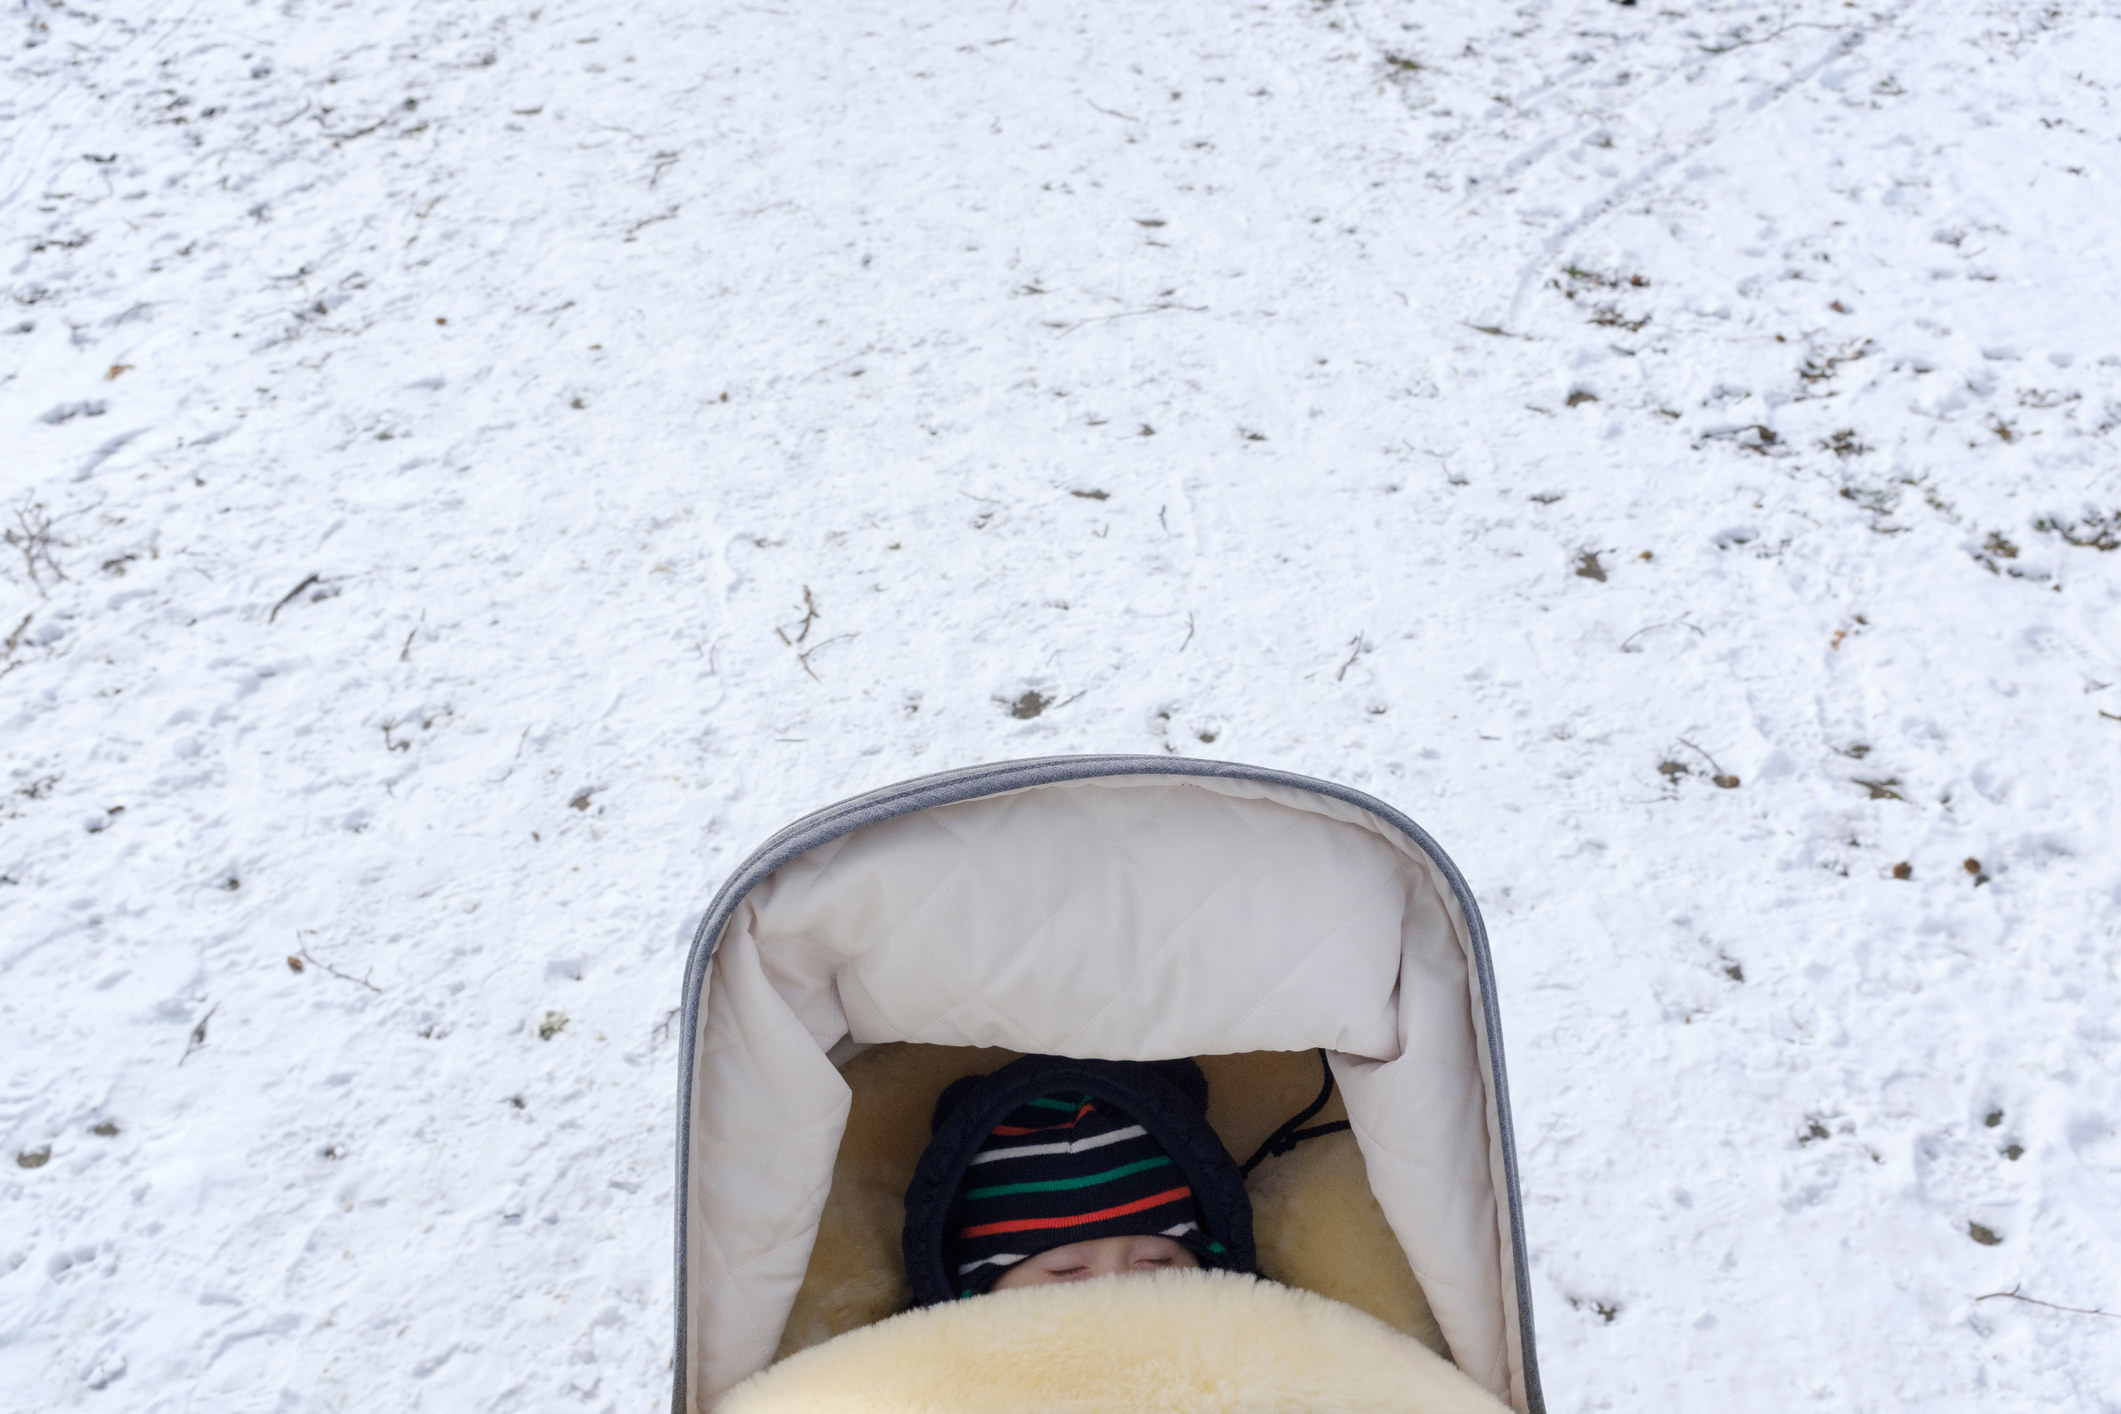 A baby sleeping in a stroller during winter